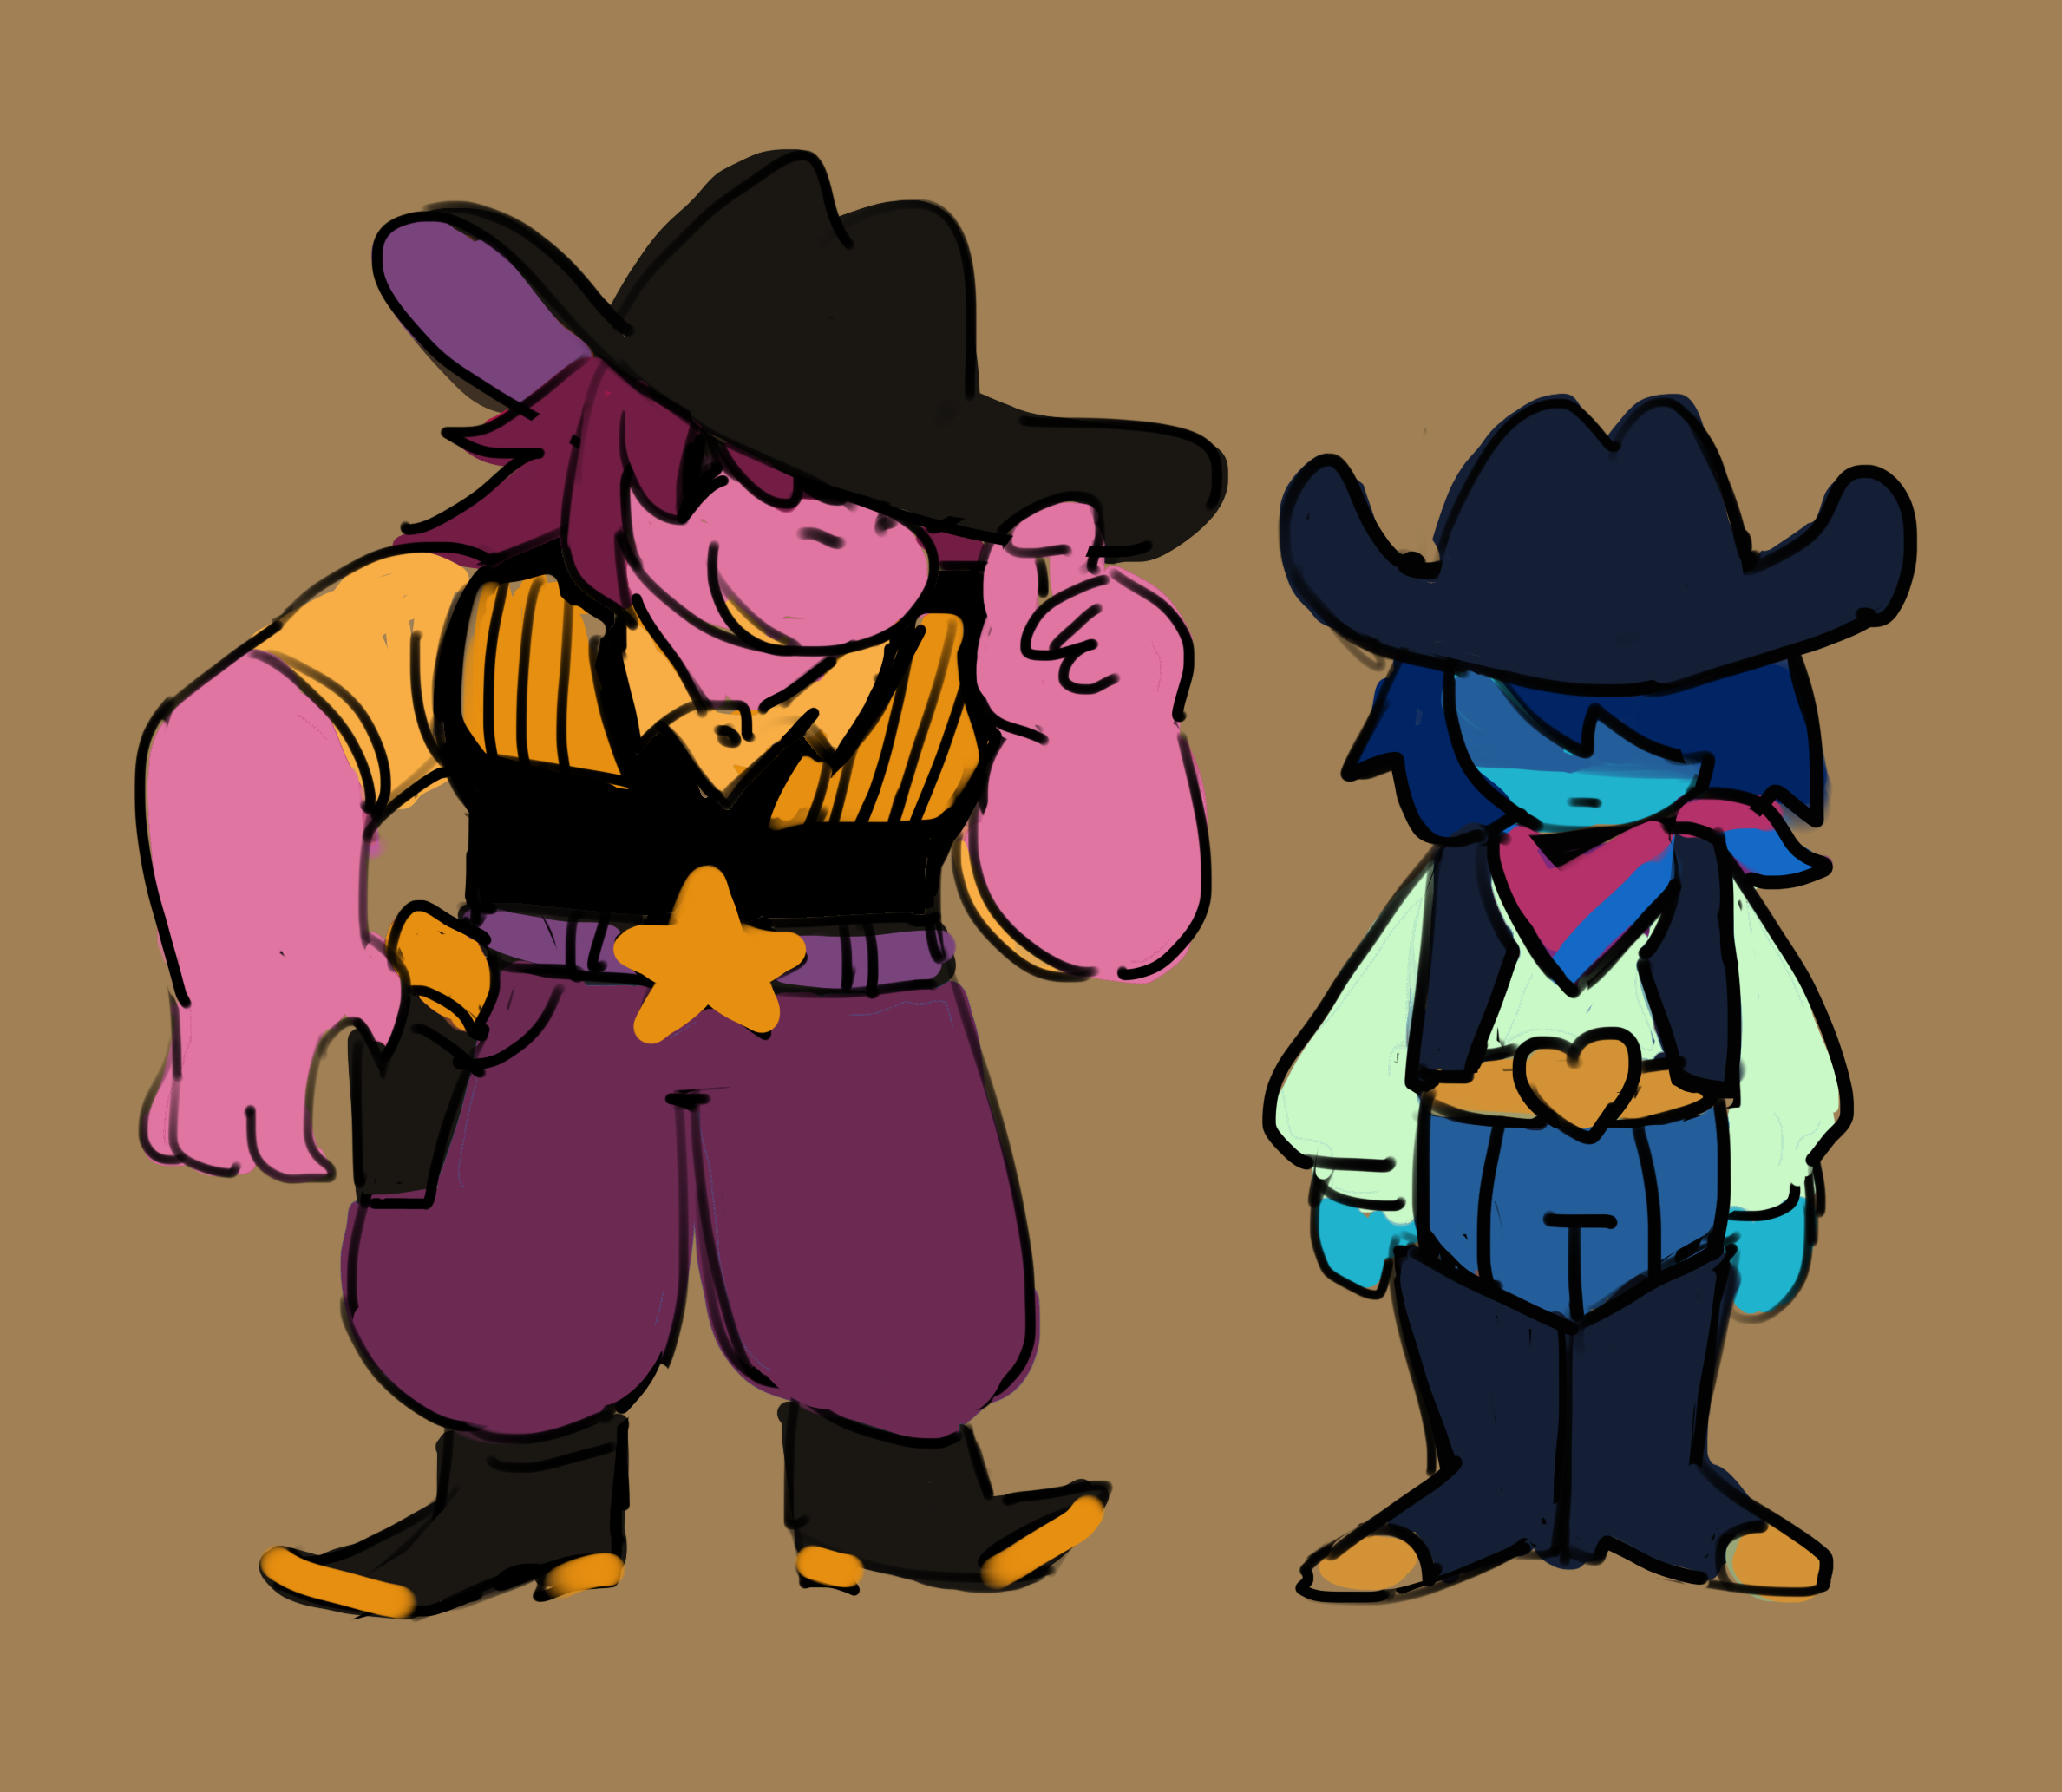 Cowboy characters that were going to show up for about five seconds